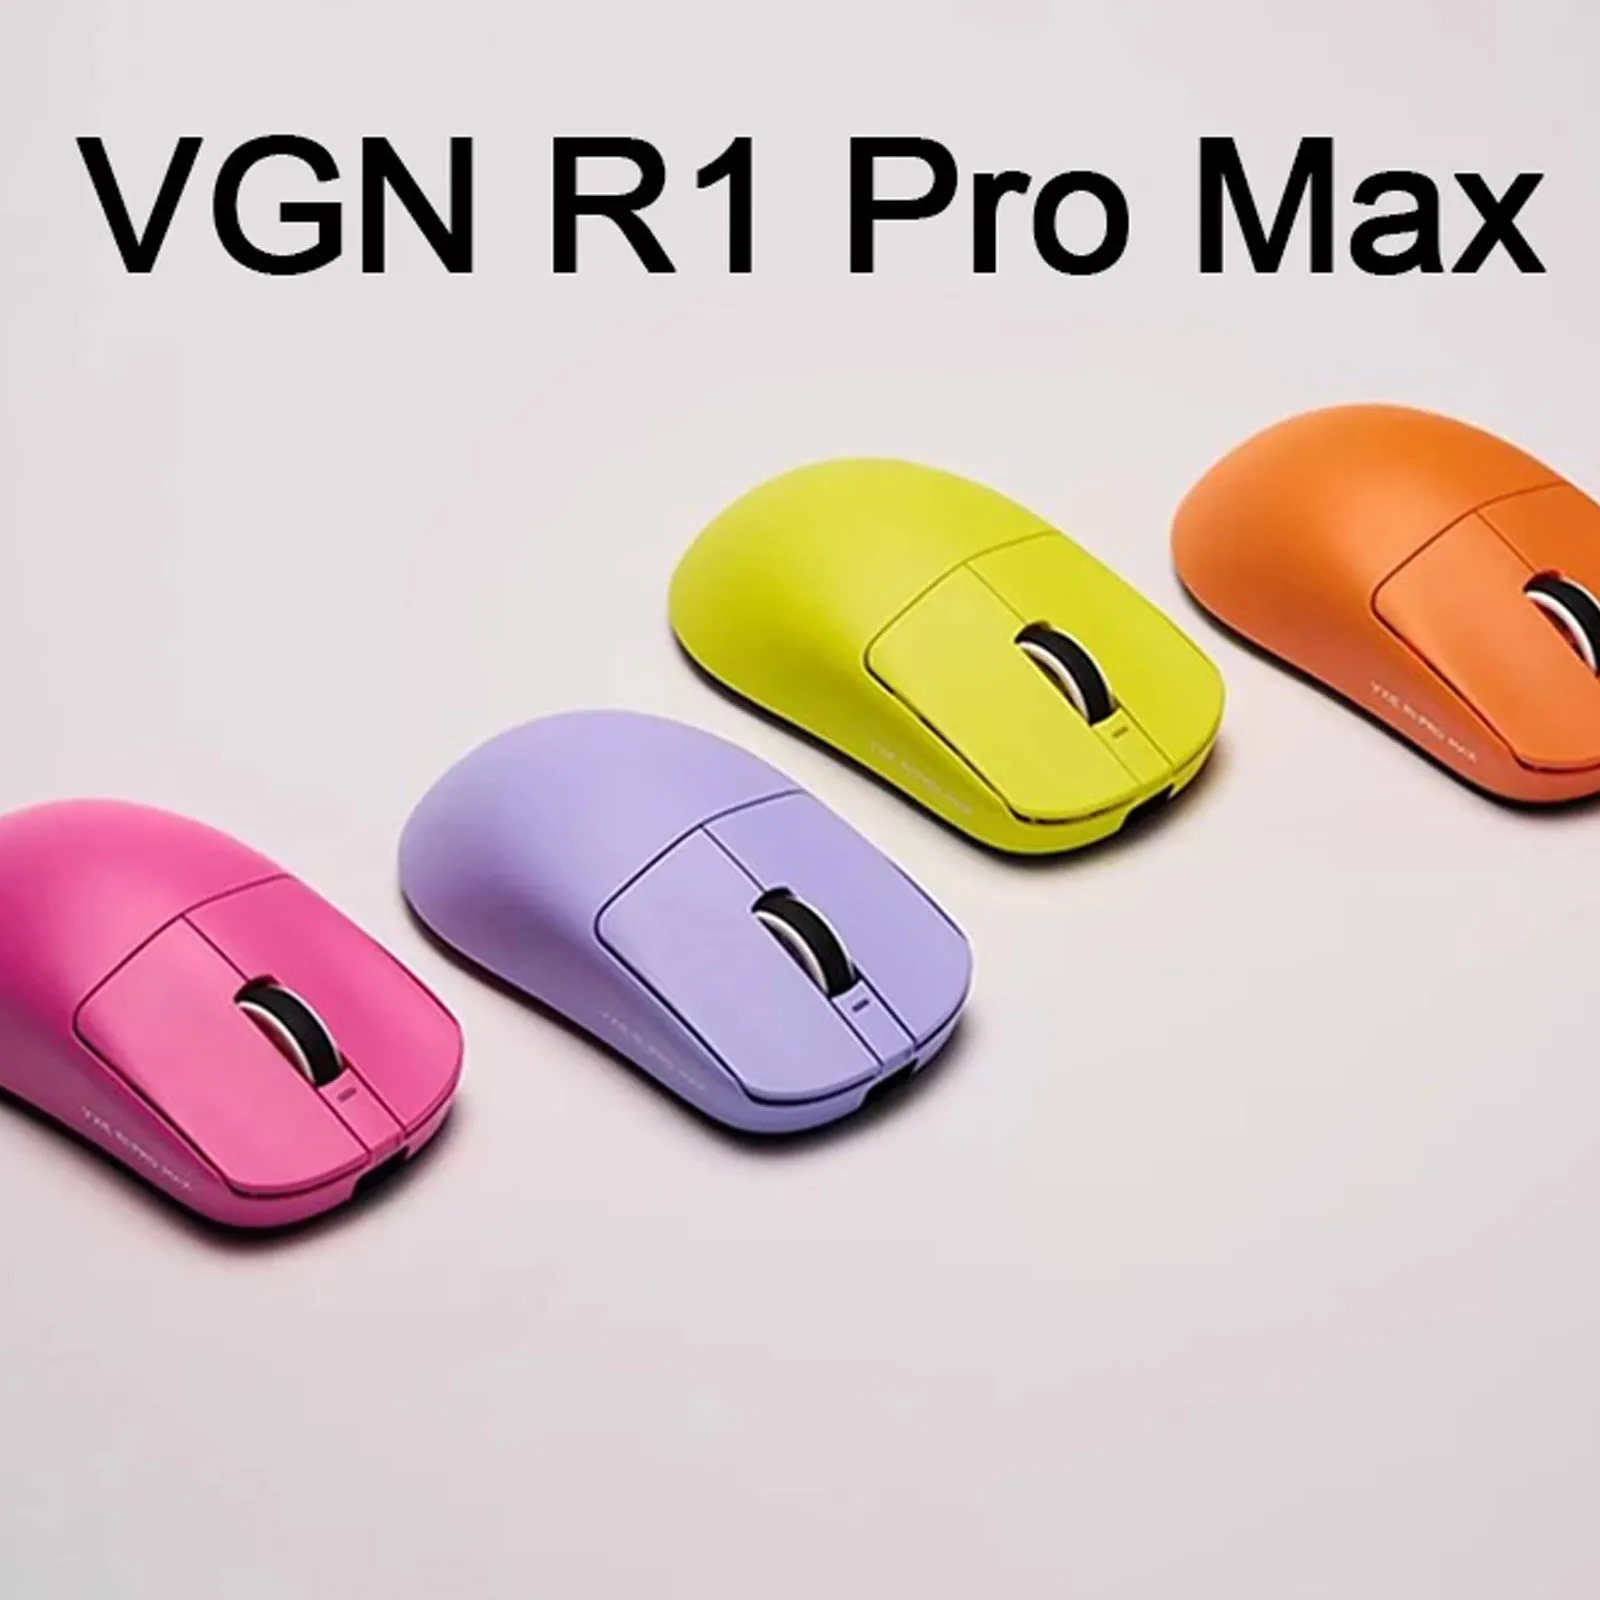 

Vgn Vxe Dragonfly R1 Pro Max Mouse Wireless Paw3395 4k Sensor Low Delay Fps Lightweight Gaming Mouse Ergonomic Pc Gamer Mac